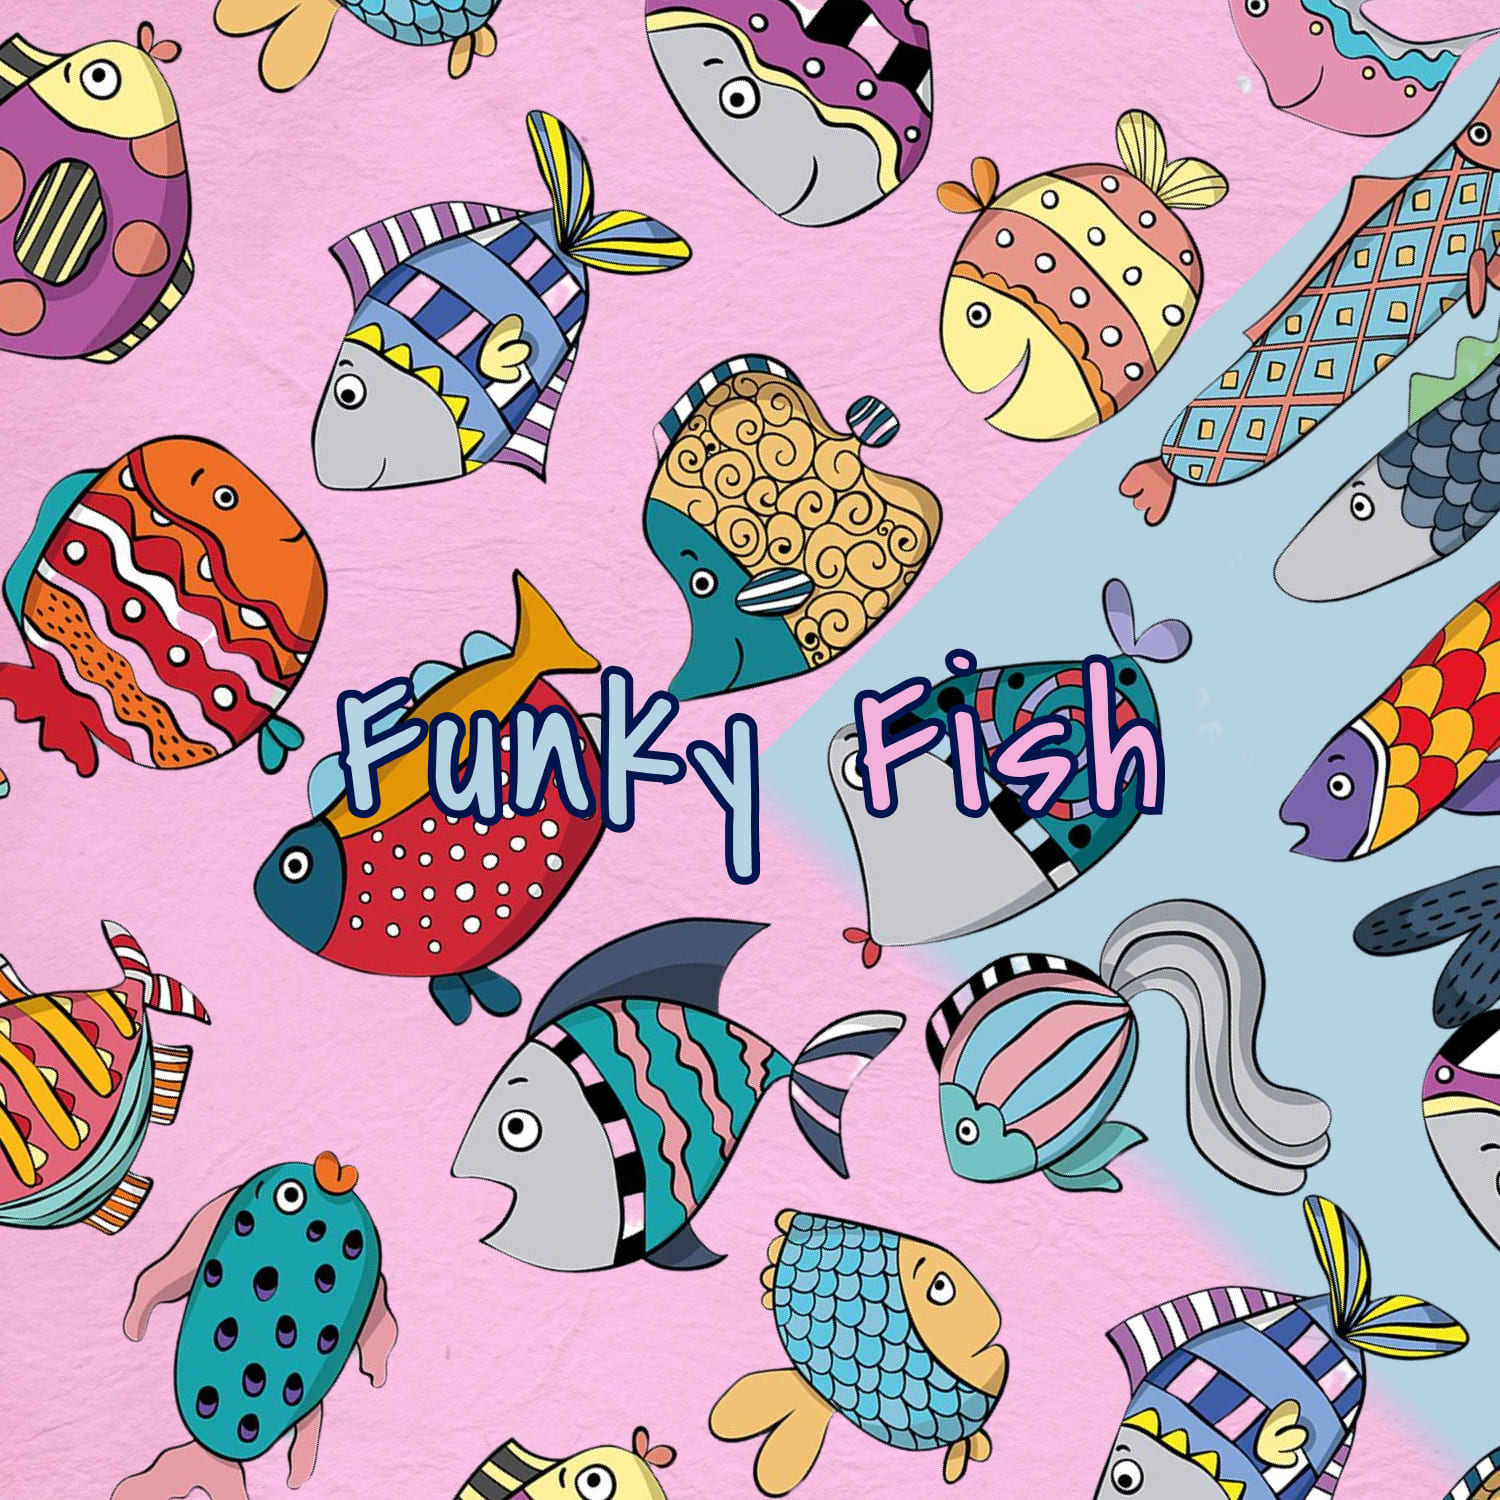 Funky Fish design pack includes 20 sea life inspired designs.